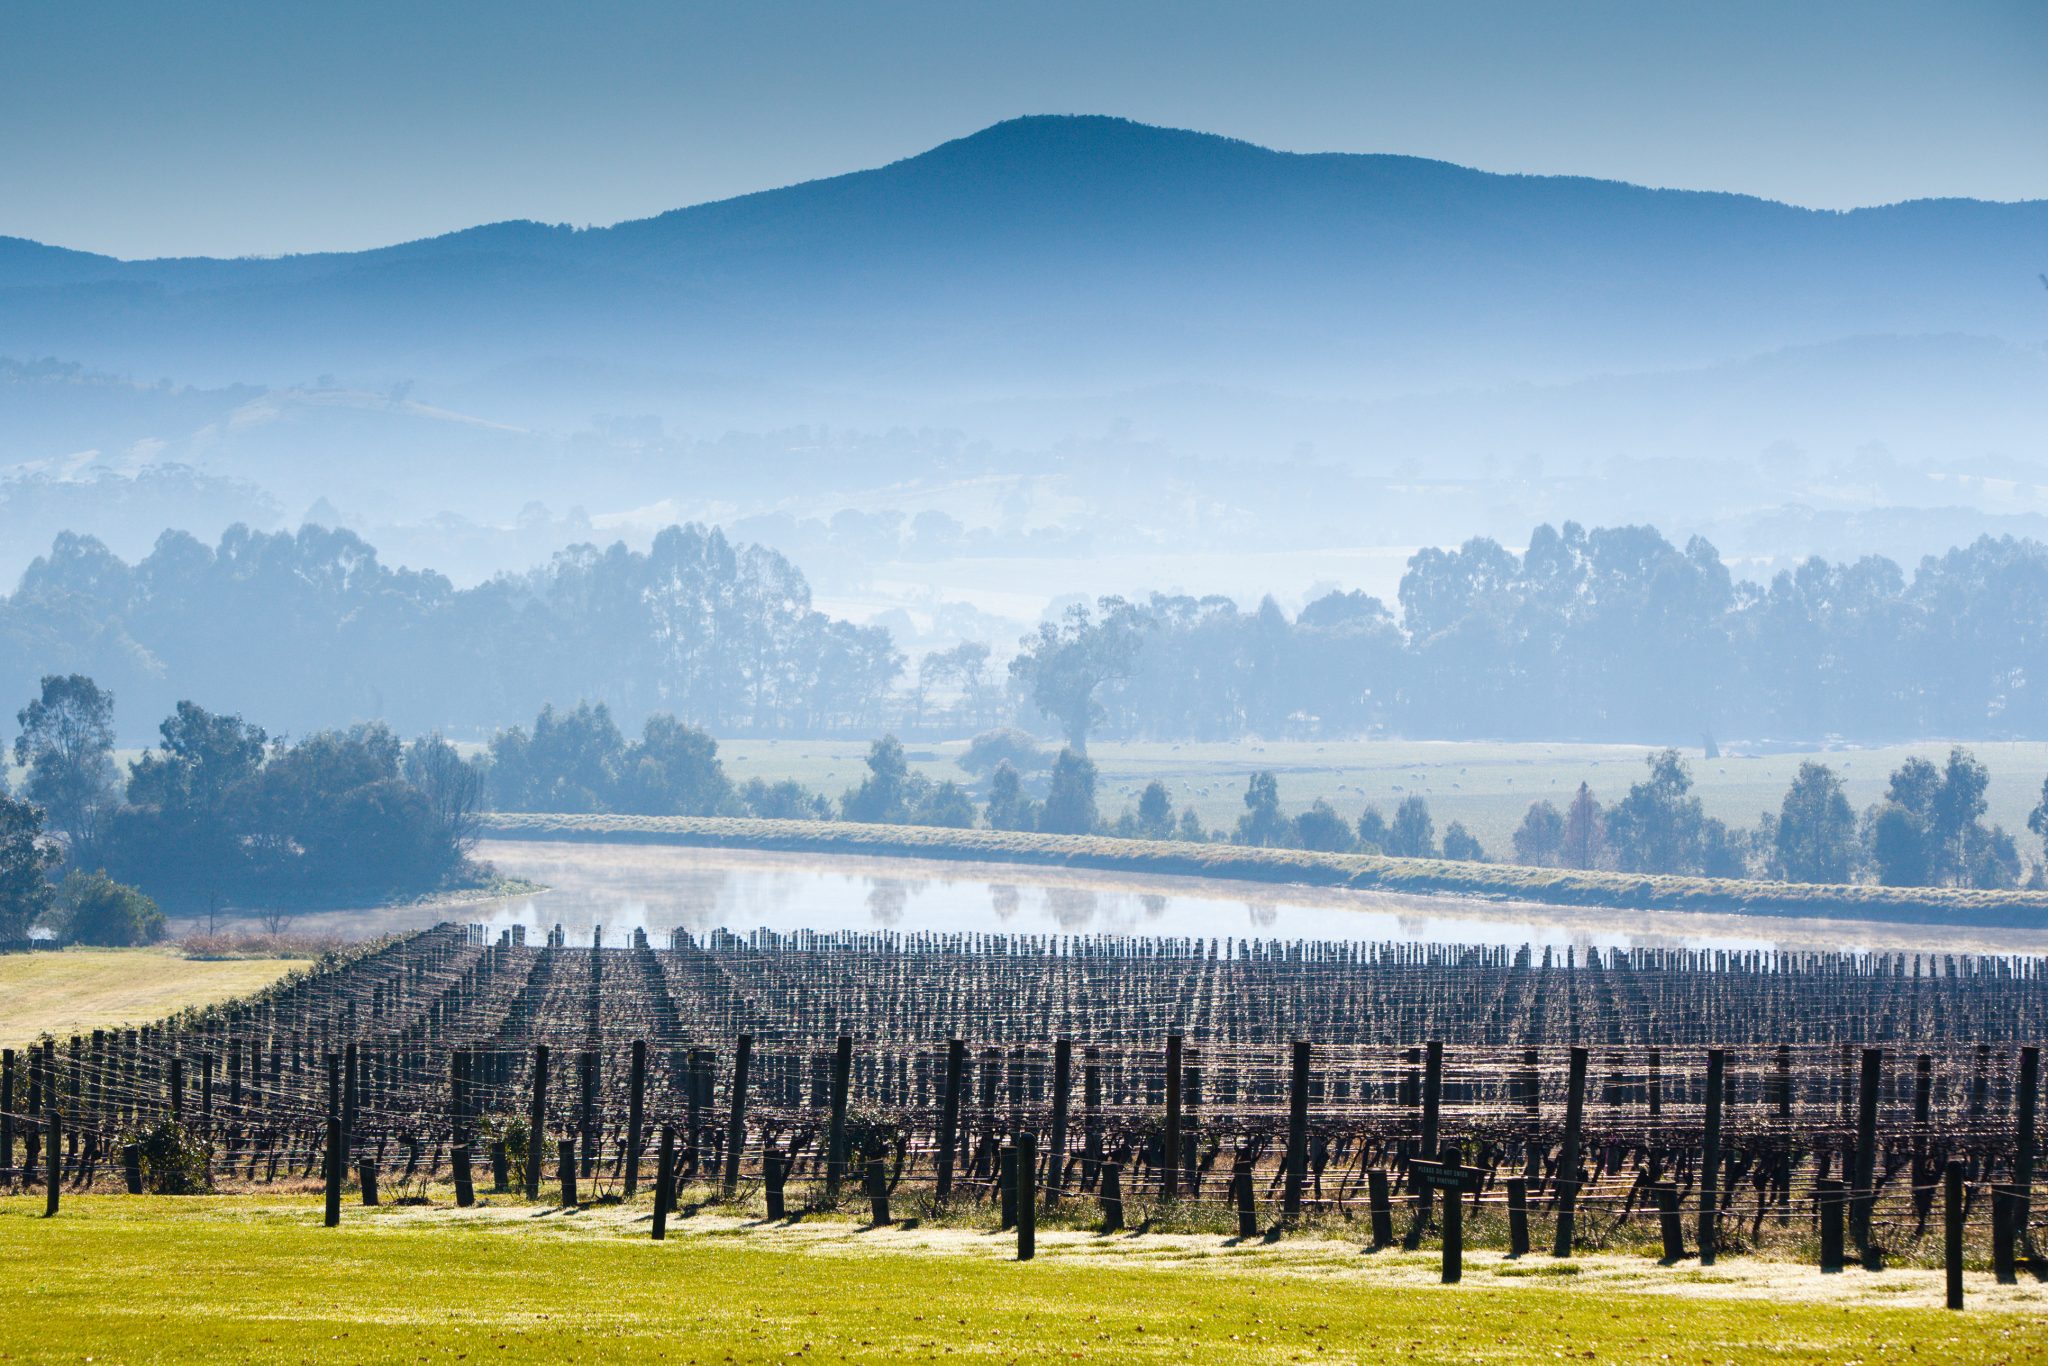 yarra valley wine tours including chandon